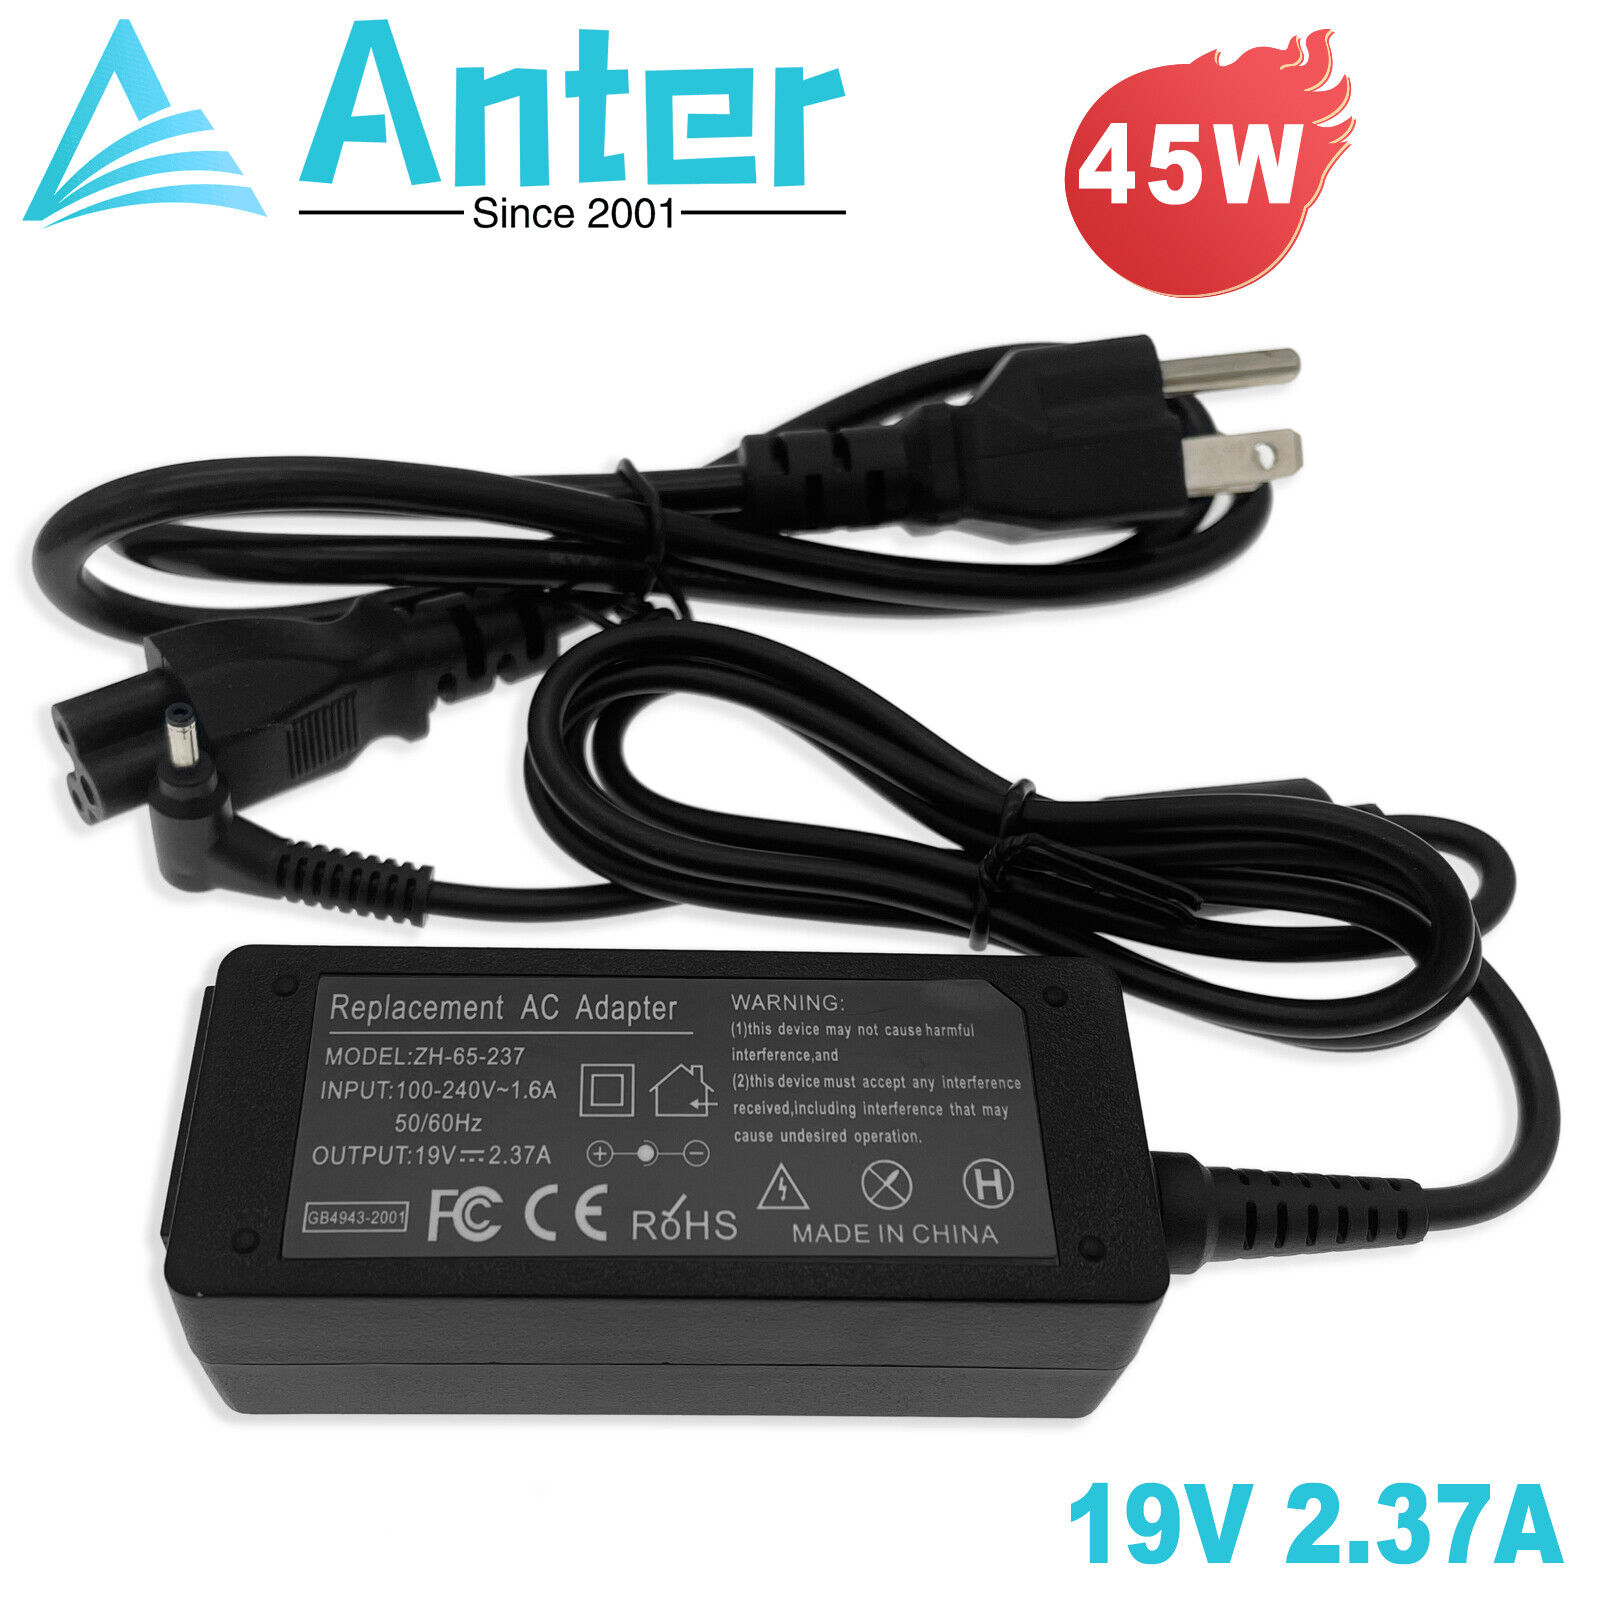 AC Adapter Charger For Acer Chrome OS Chromebook R11 Model N15Q8 CB5-132T/C738T